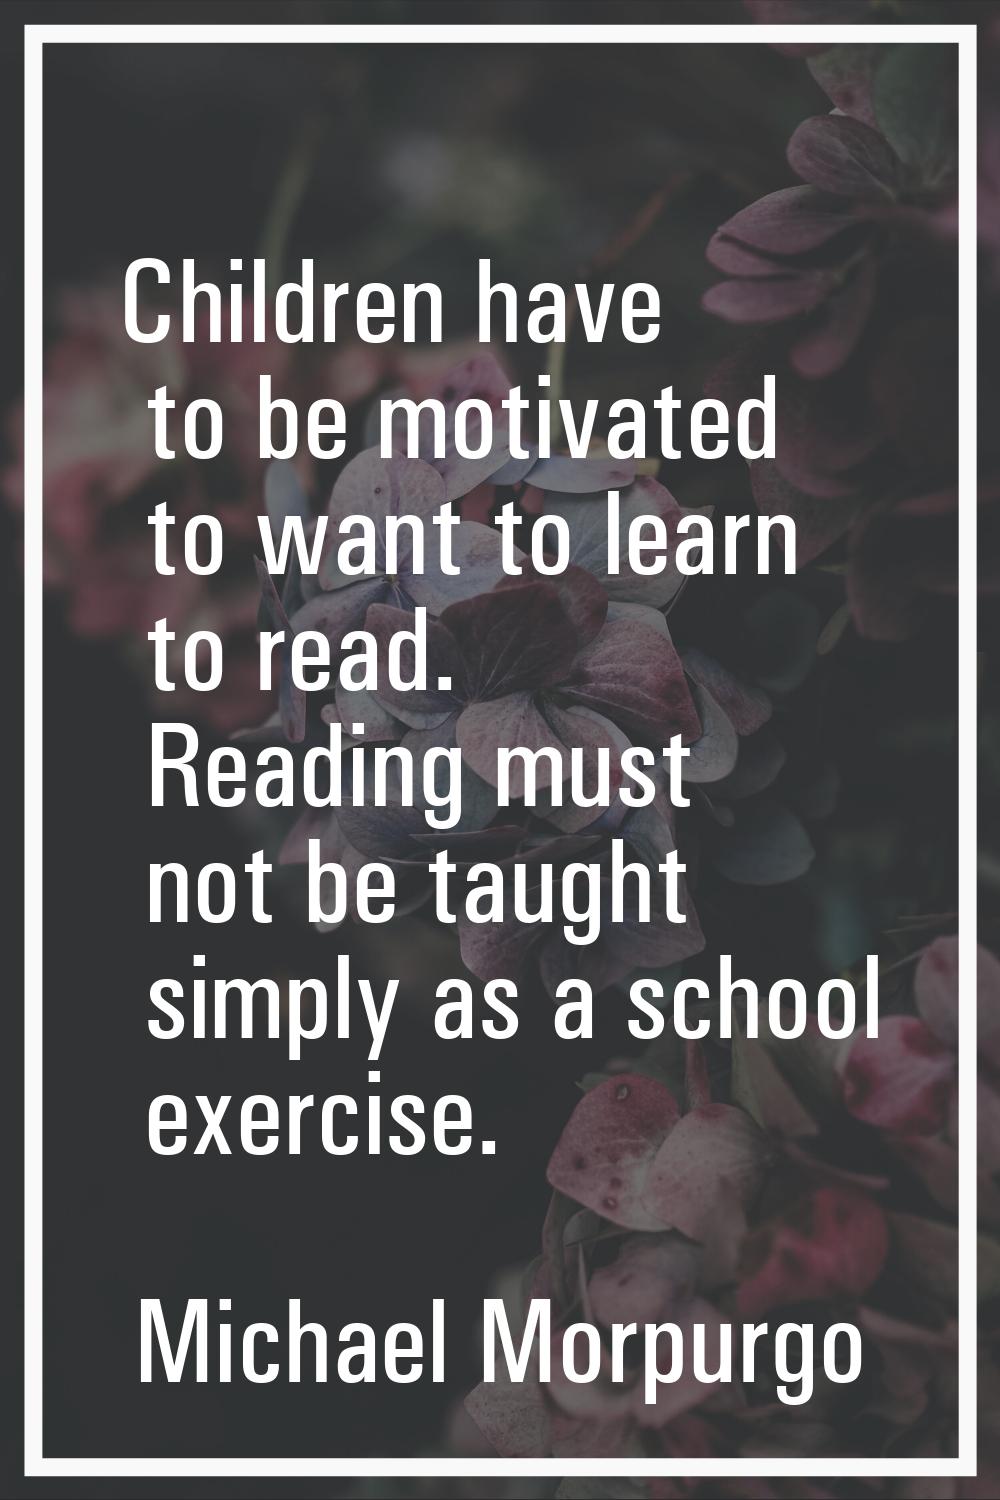 Children have to be motivated to want to learn to read. Reading must not be taught simply as a scho